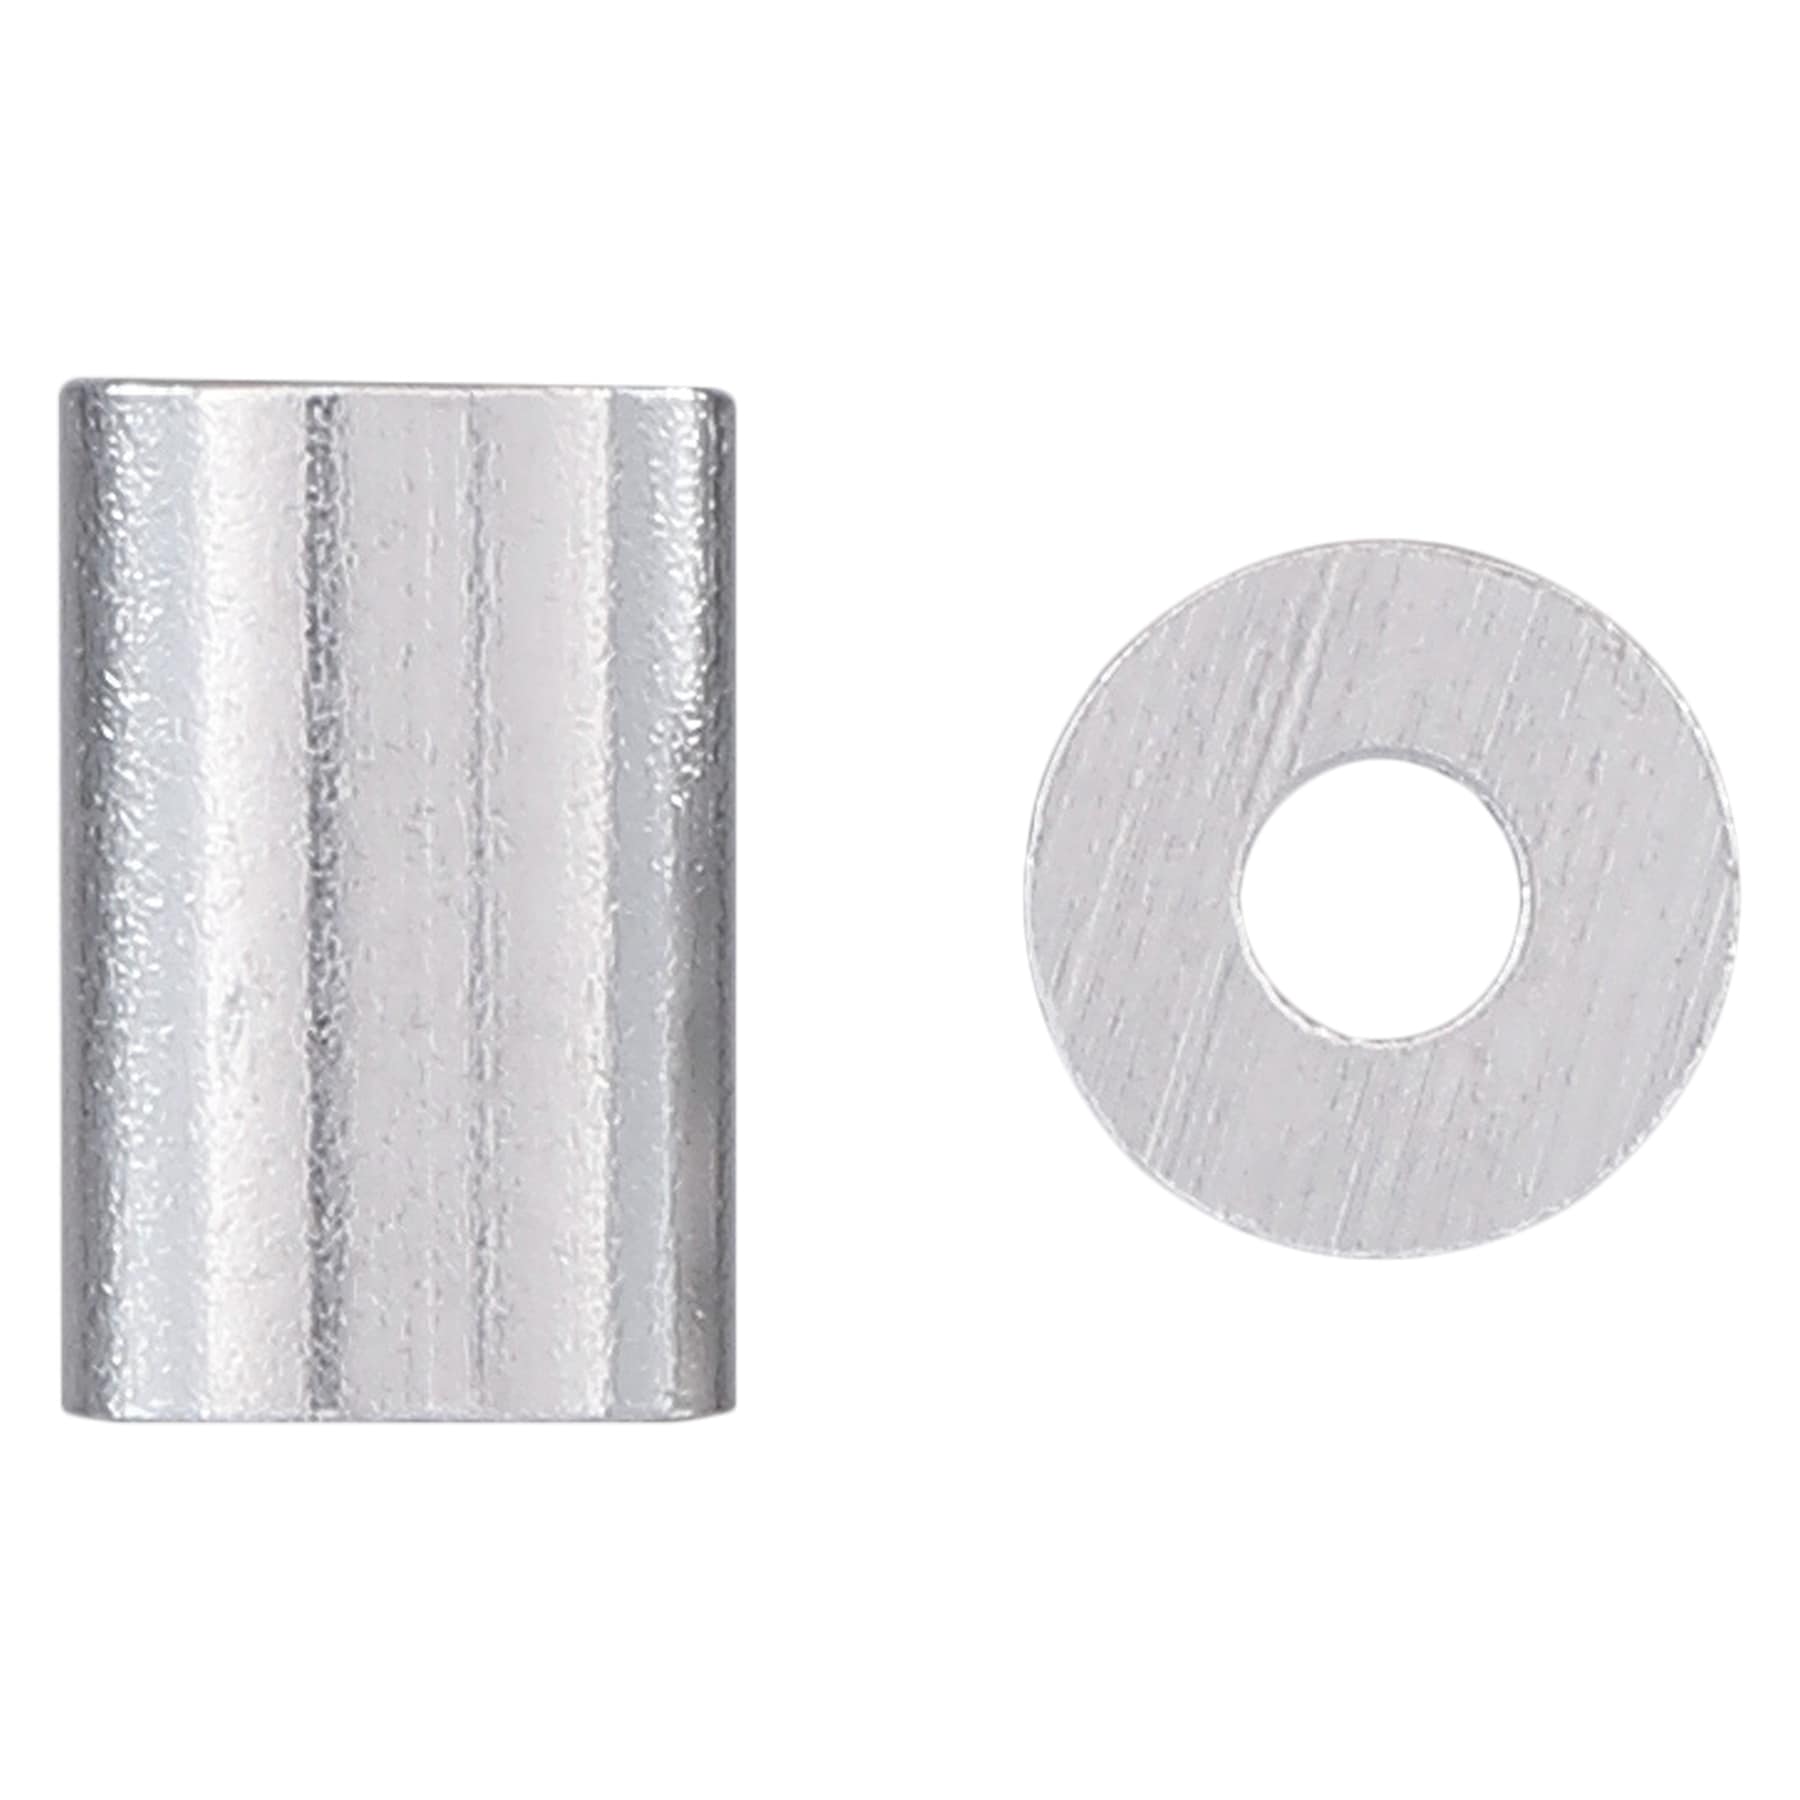 National Hardware N100-294 Ferrule and Stop, 1/16 inch, Aluminum